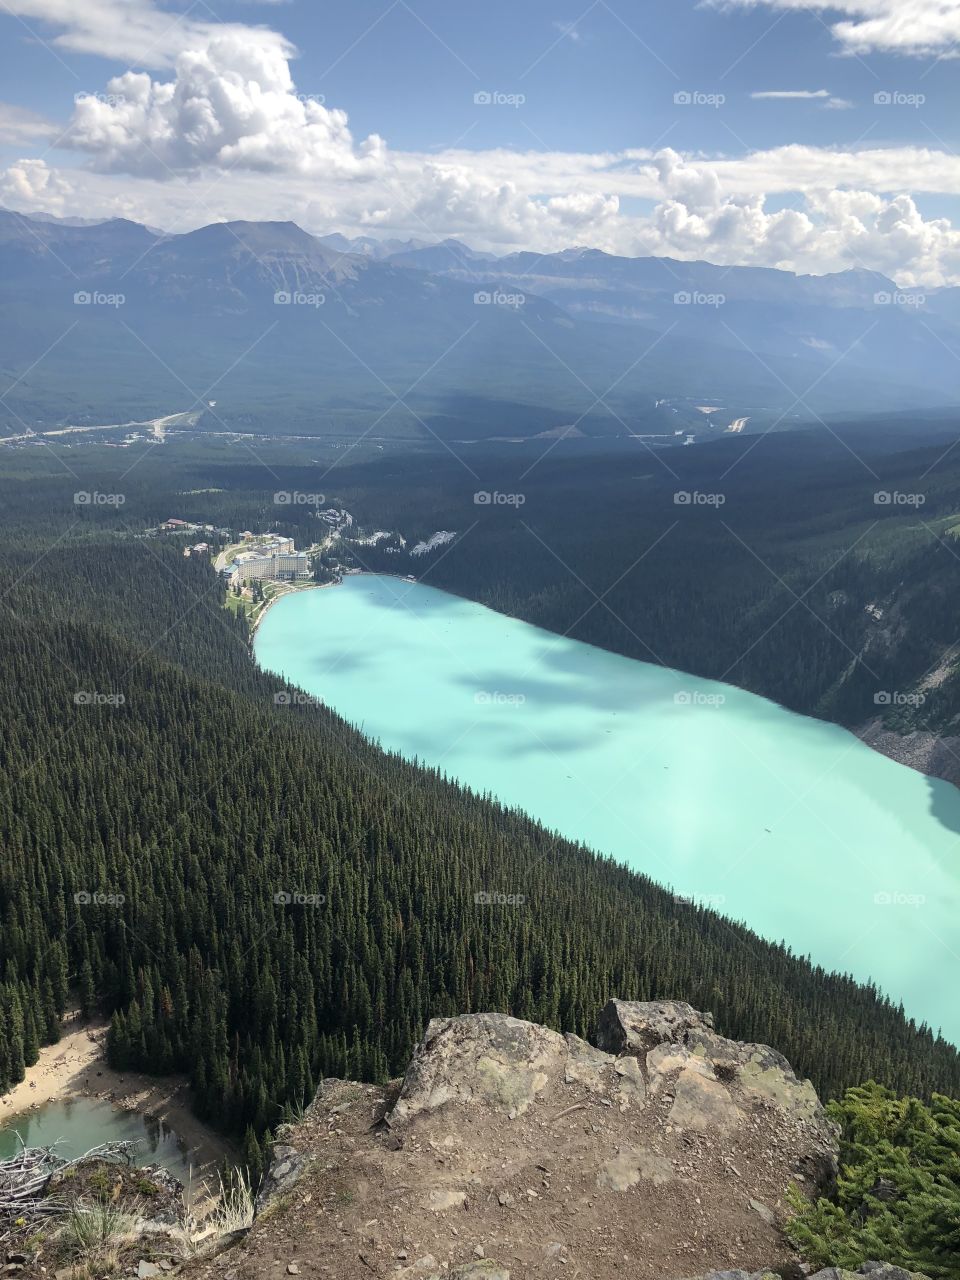 Blue lakes from the mountain